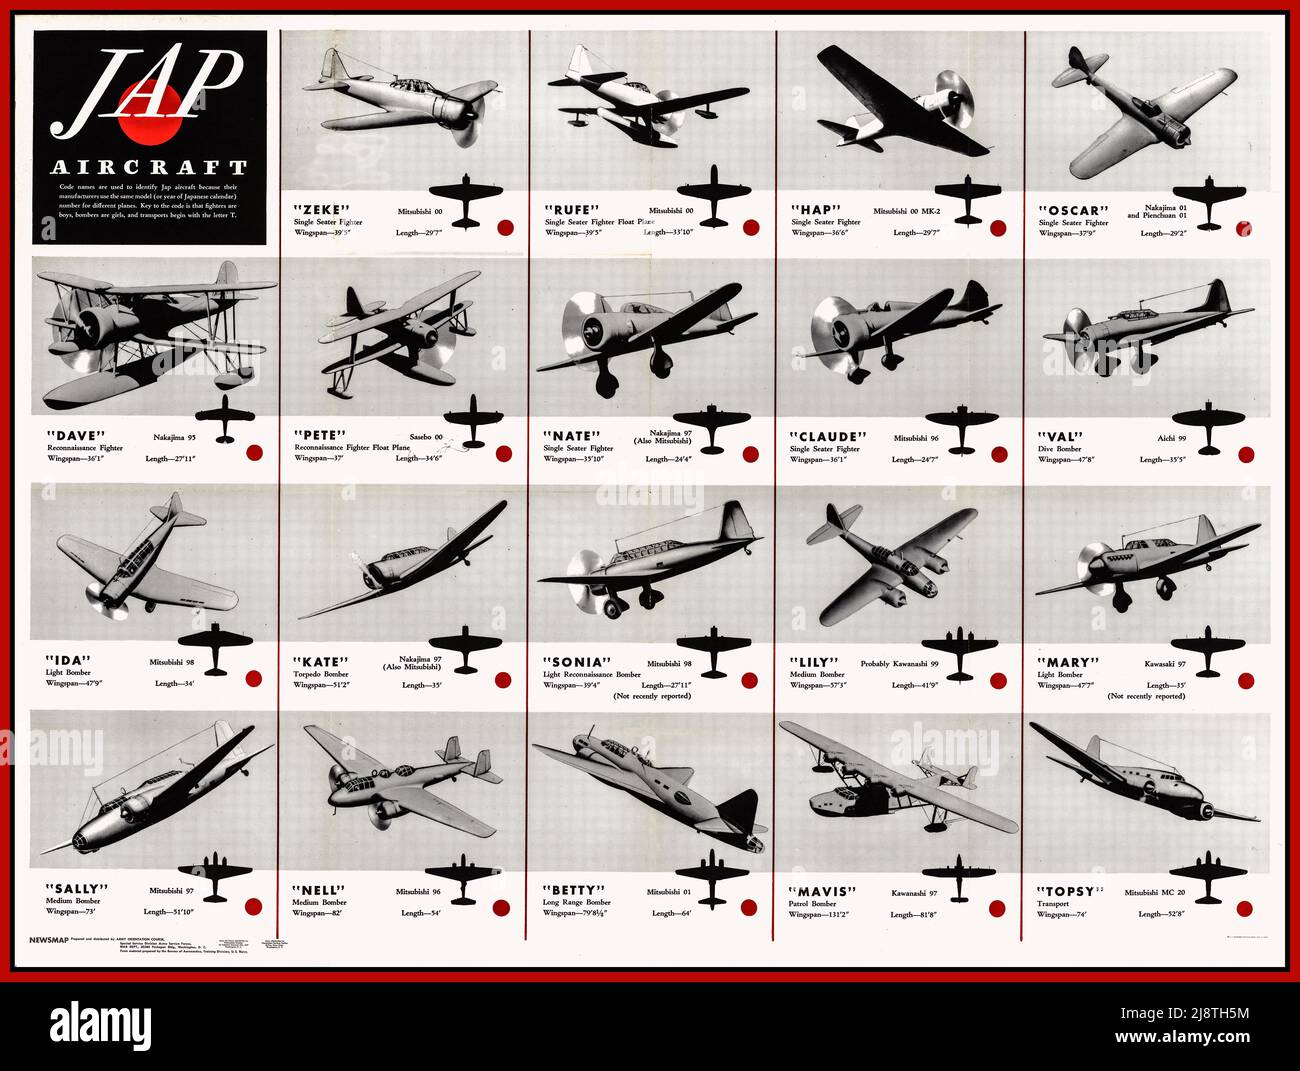 WW2 Japanese Aircraft Type Recognition Avaiation Poster Chart 1943 World War II World War 'JAP AIRCRAFT' Illustration Poster identifica forme tipi silhouette Foto Stock